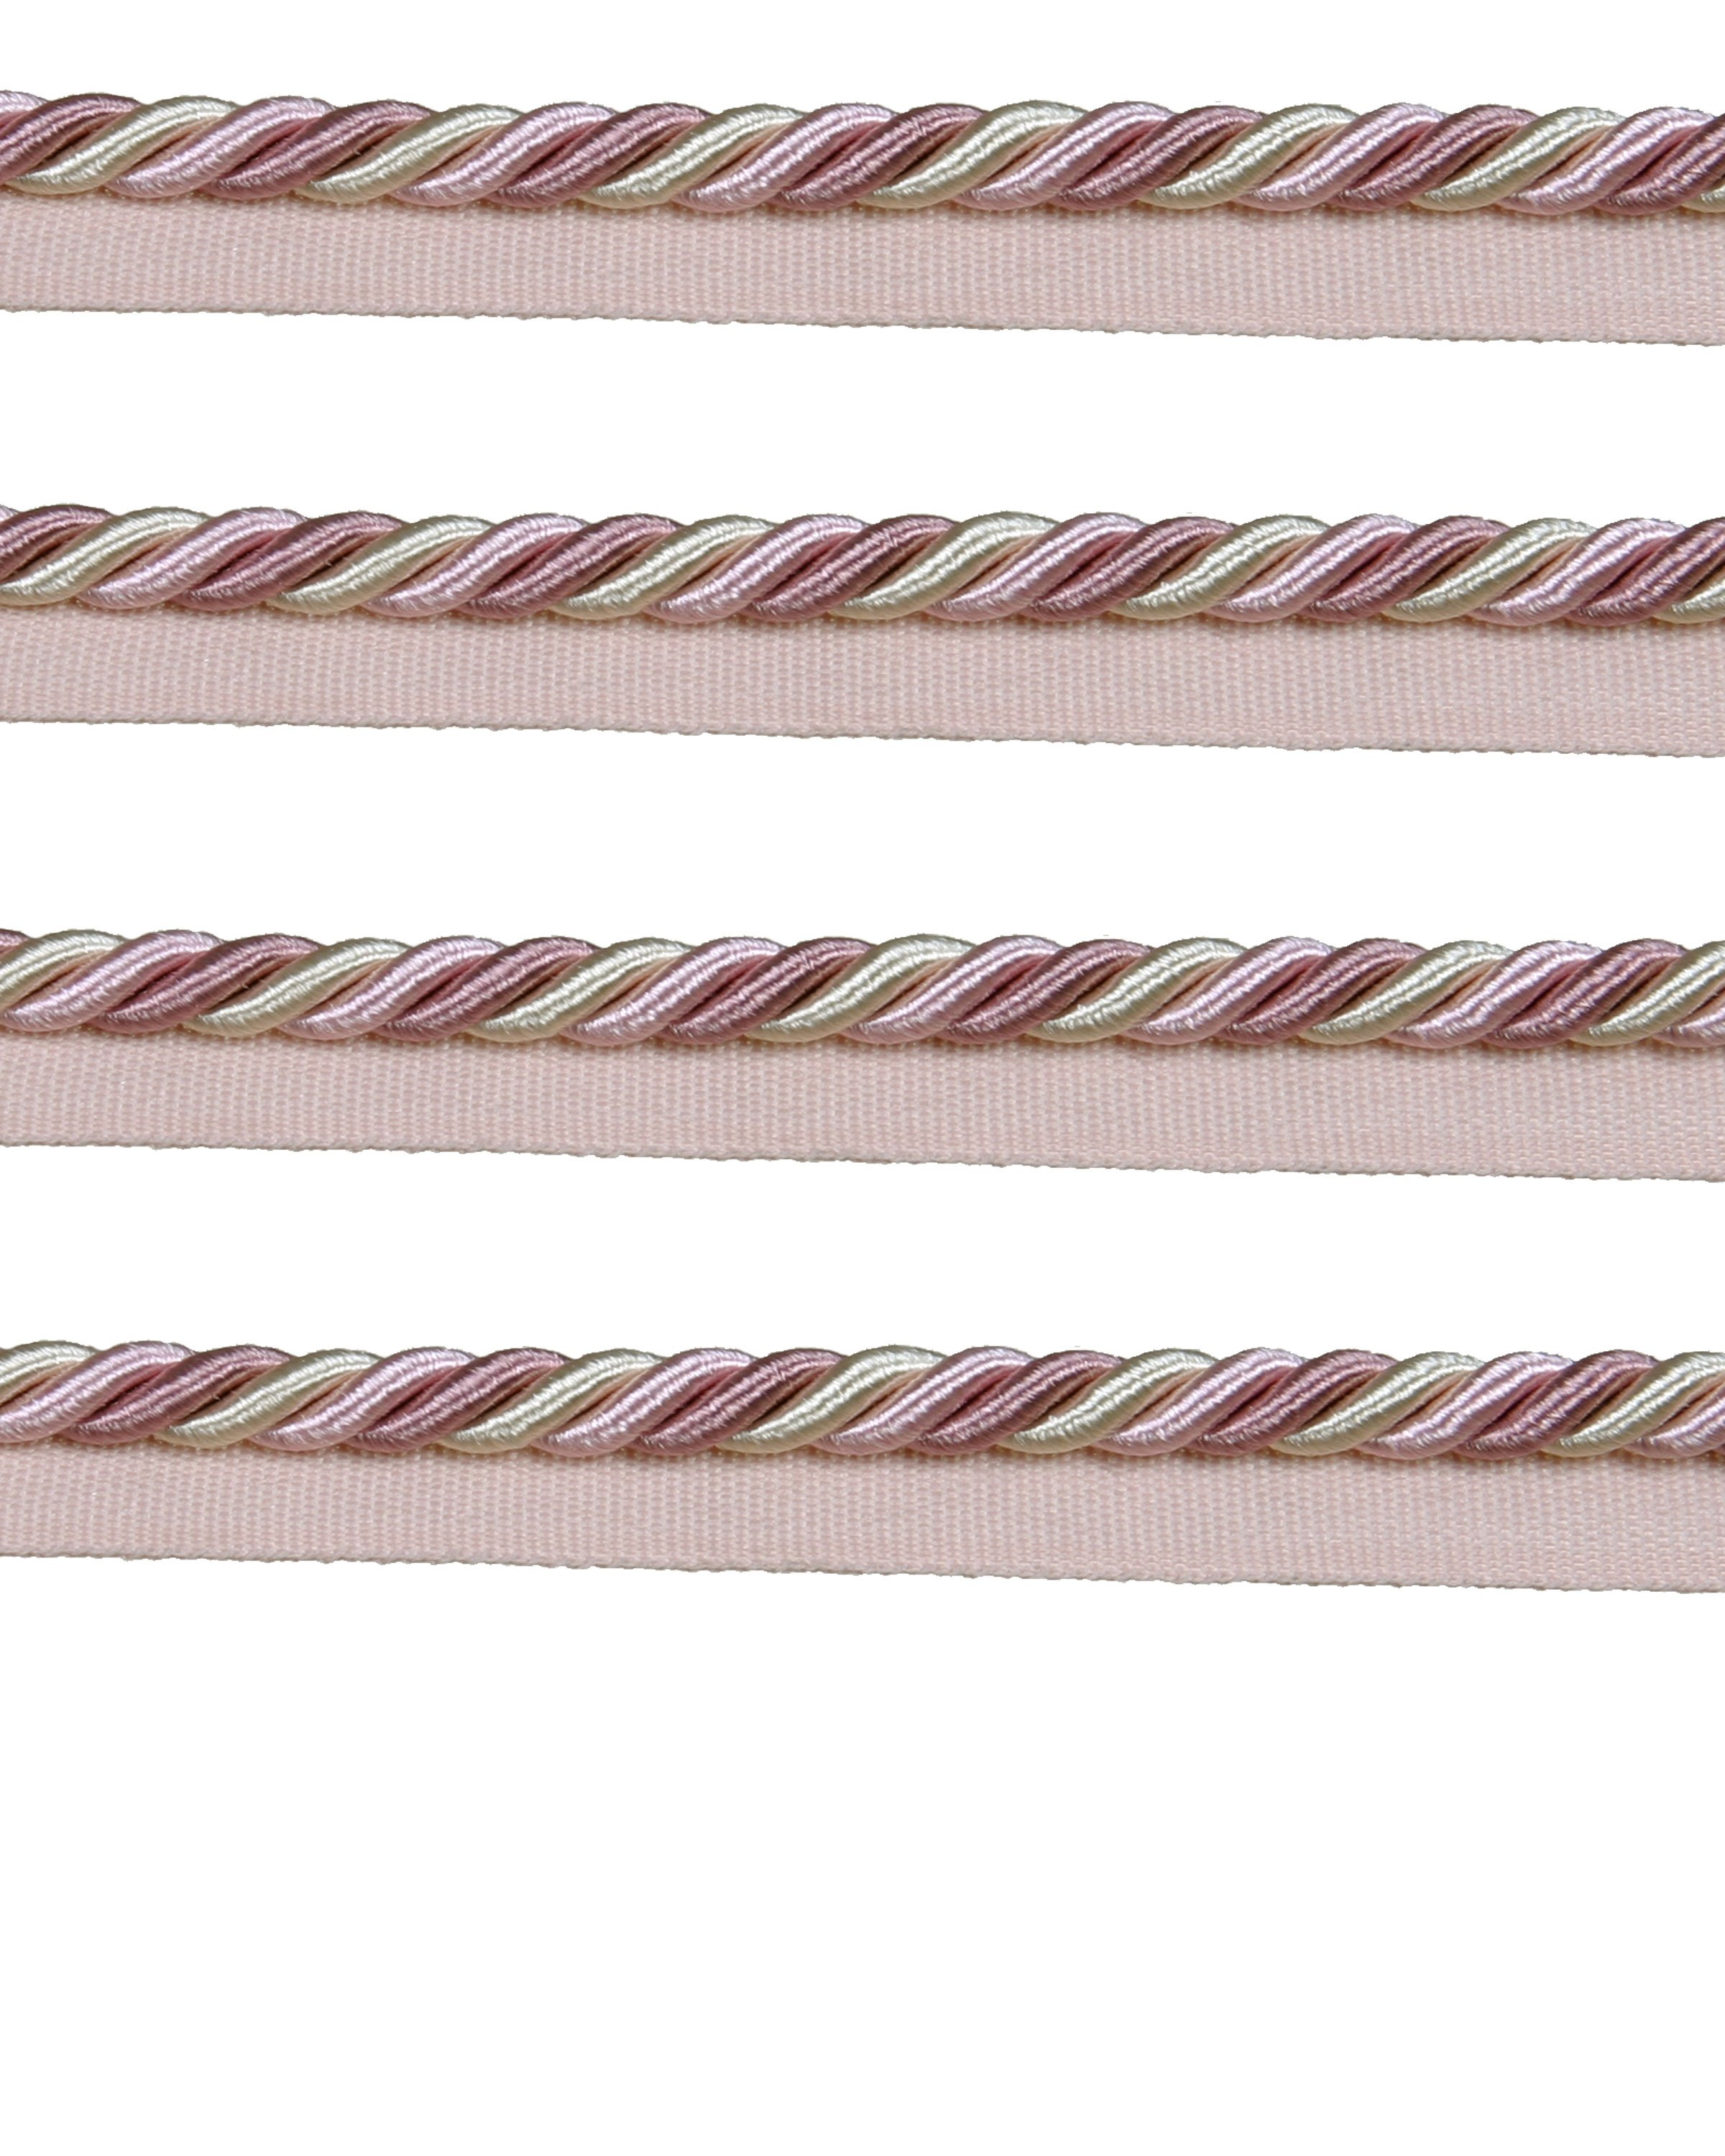 Piping Cord 8mm on Tape - Dusky Pink Price is for 5 metres